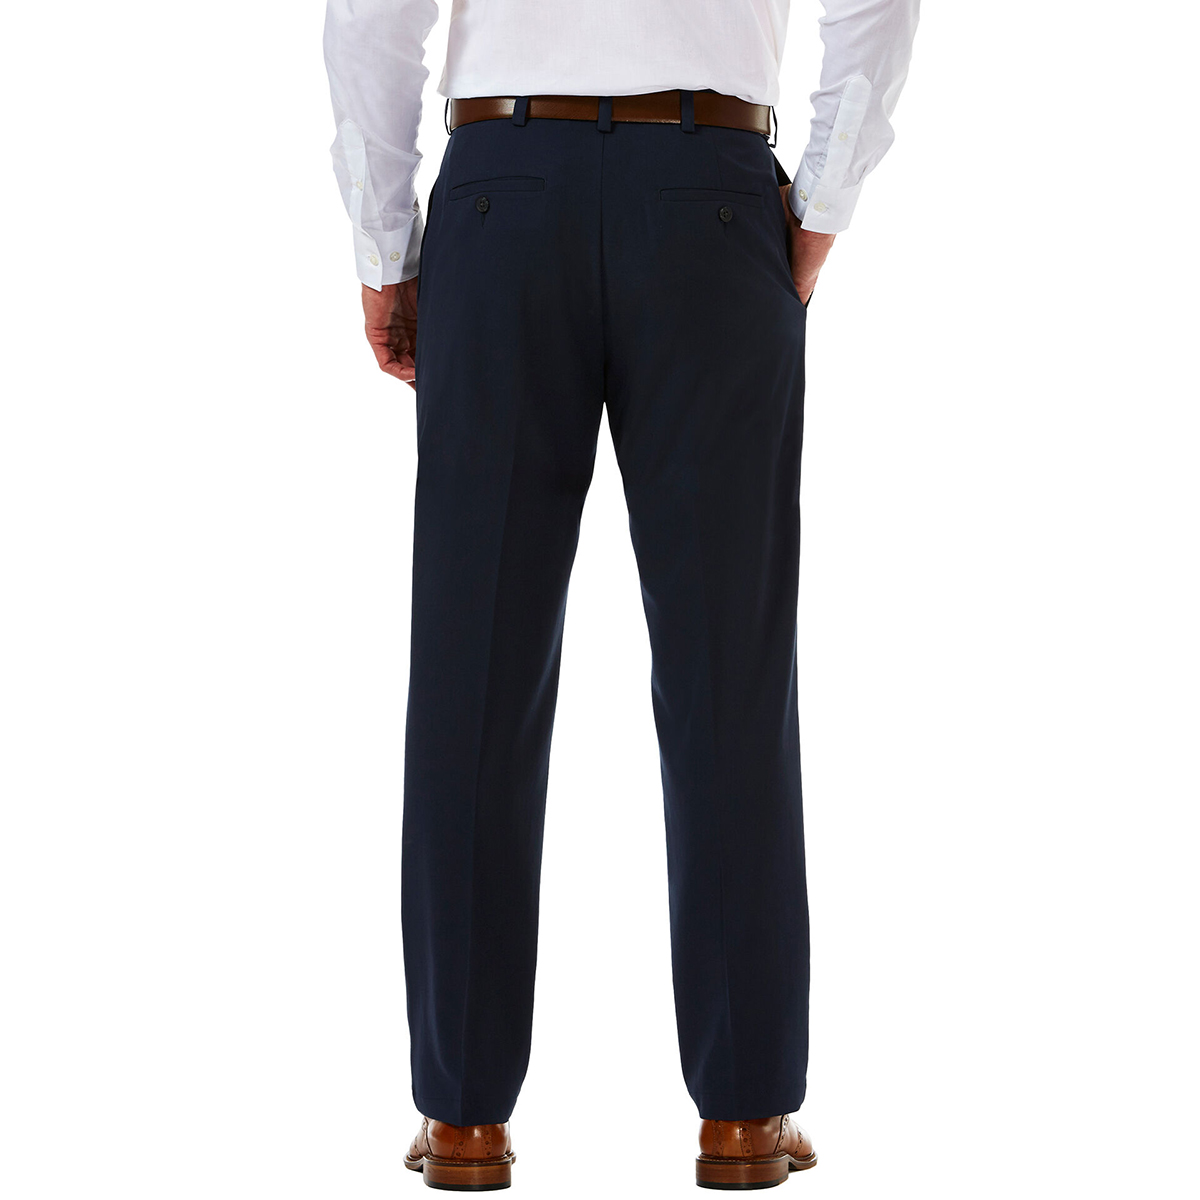 Haggar Men's Cool 18 Classic Fit Flat Front Pro Pant for sale online